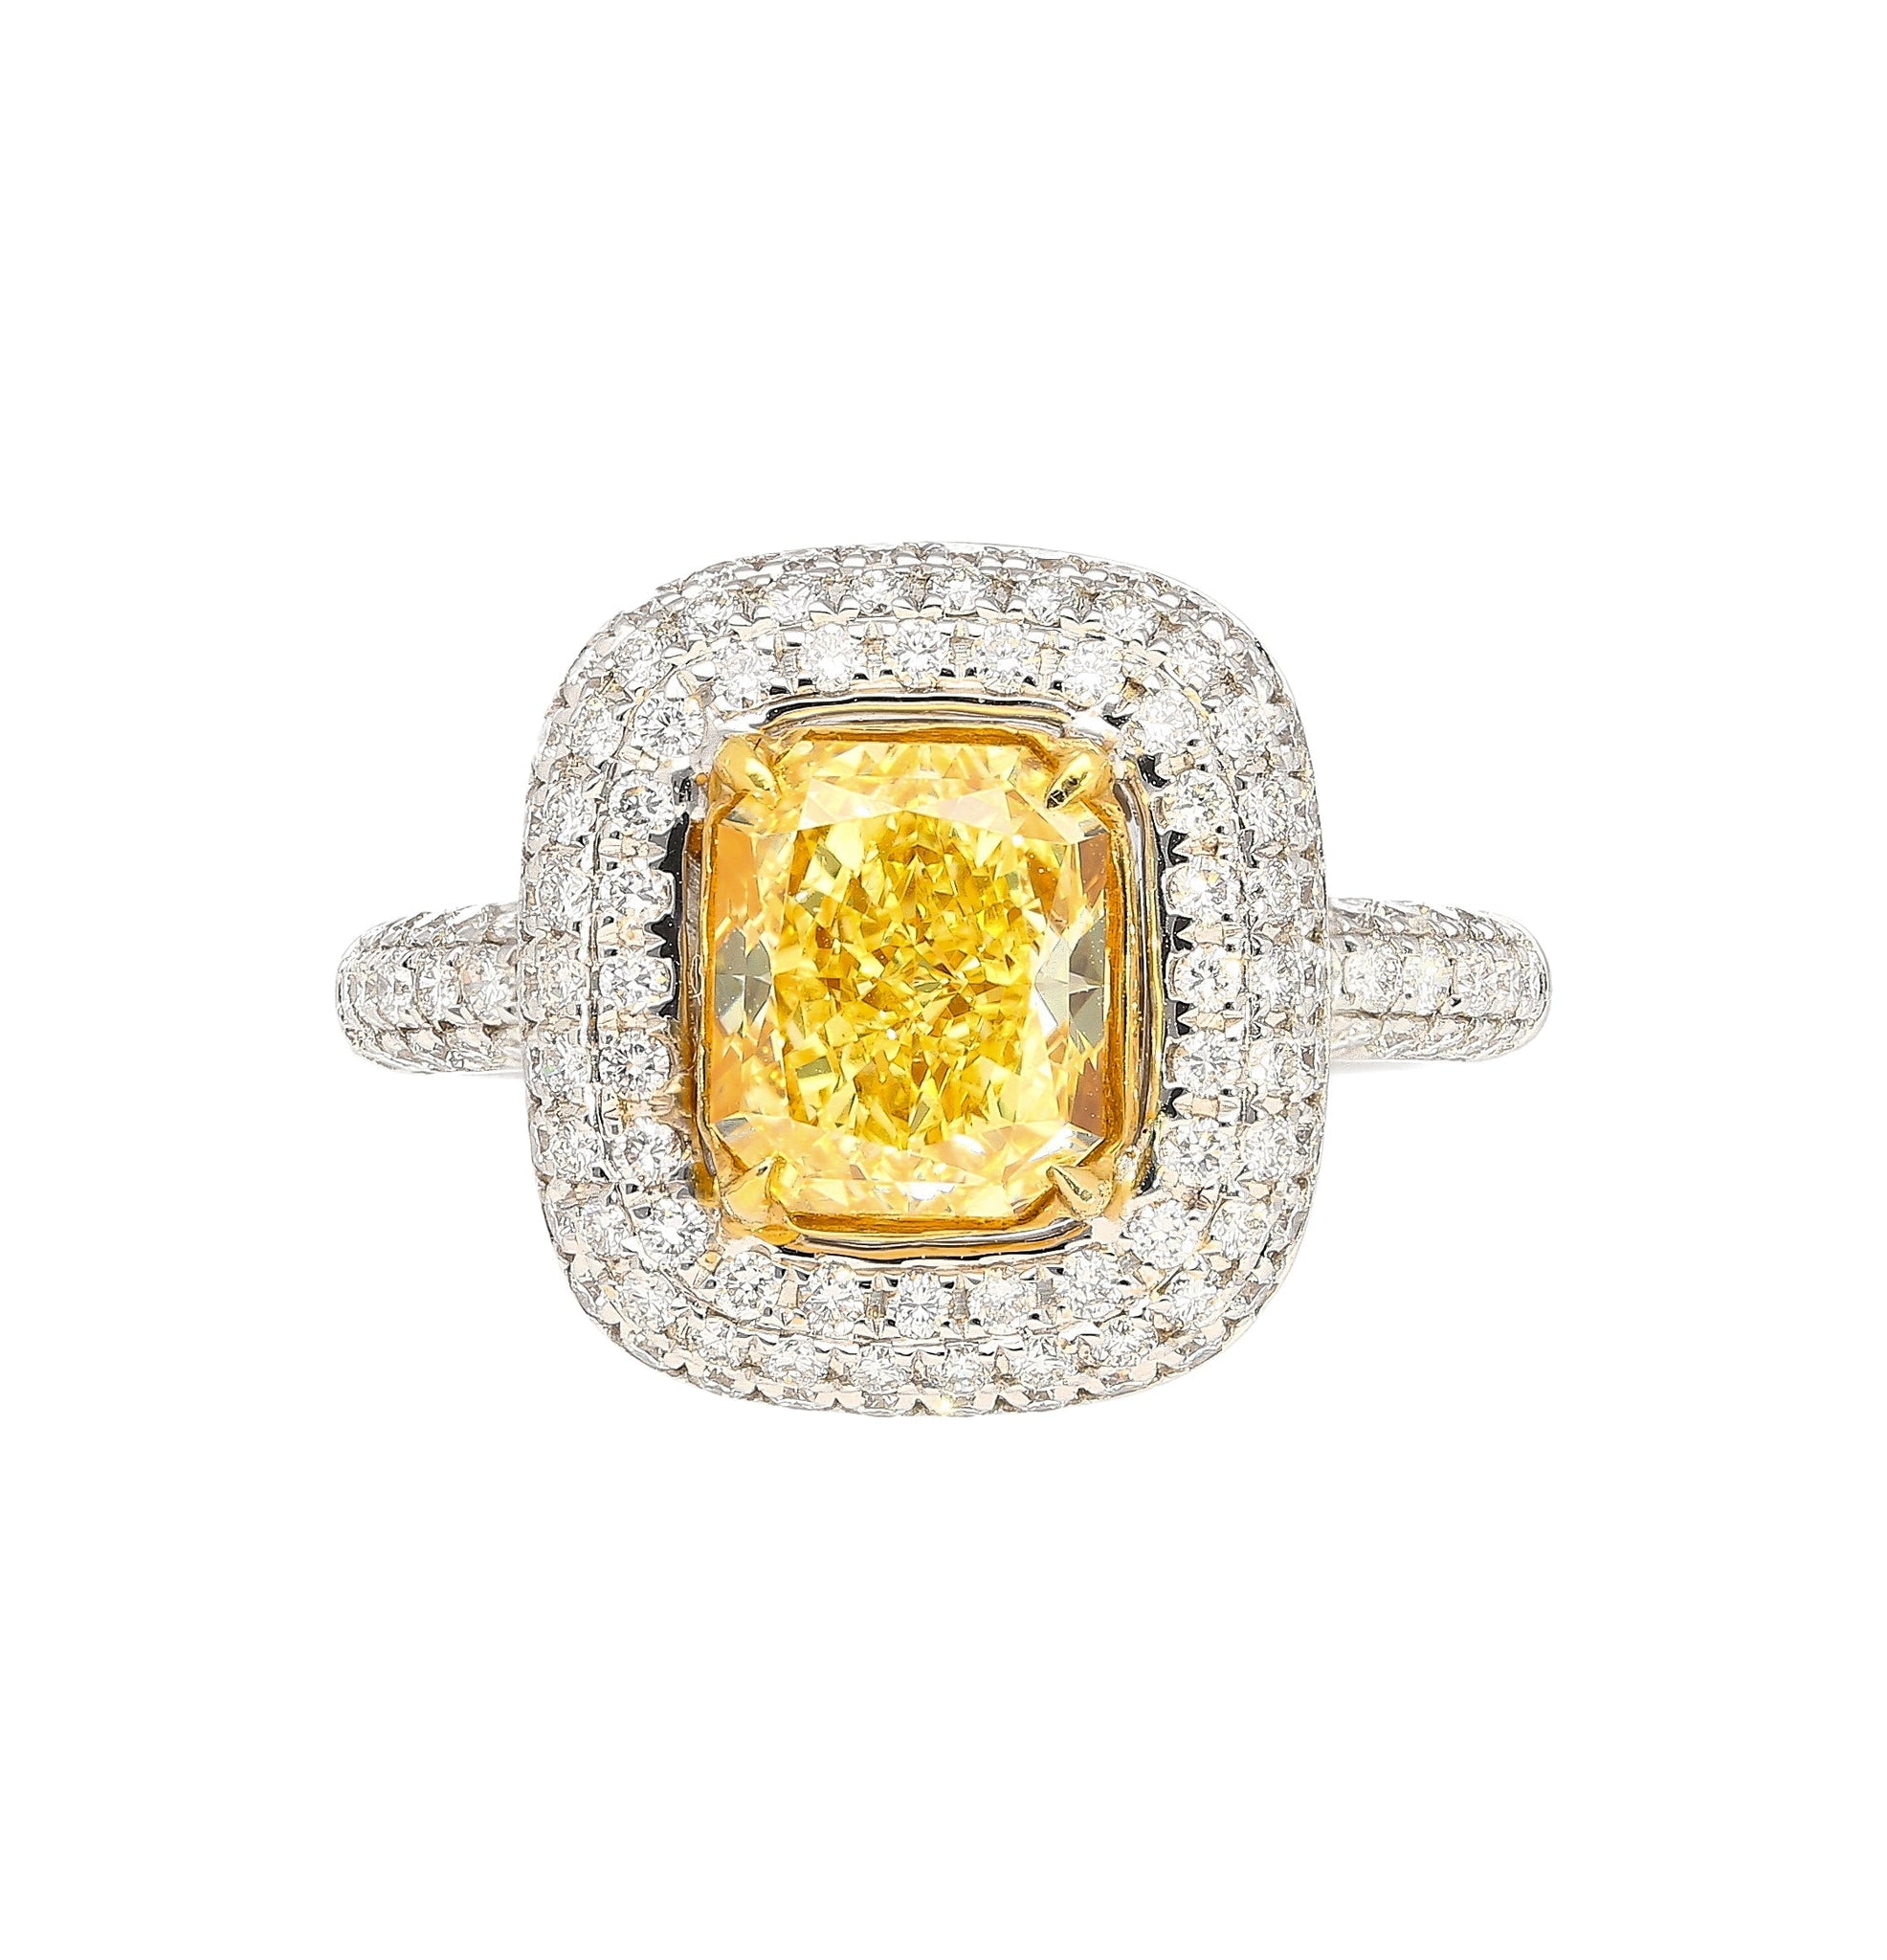 GIA Certified 2.35 Fancy Yellow Diamond Ring With 1.0 CTW Diamond Cluster in 18K White Gold